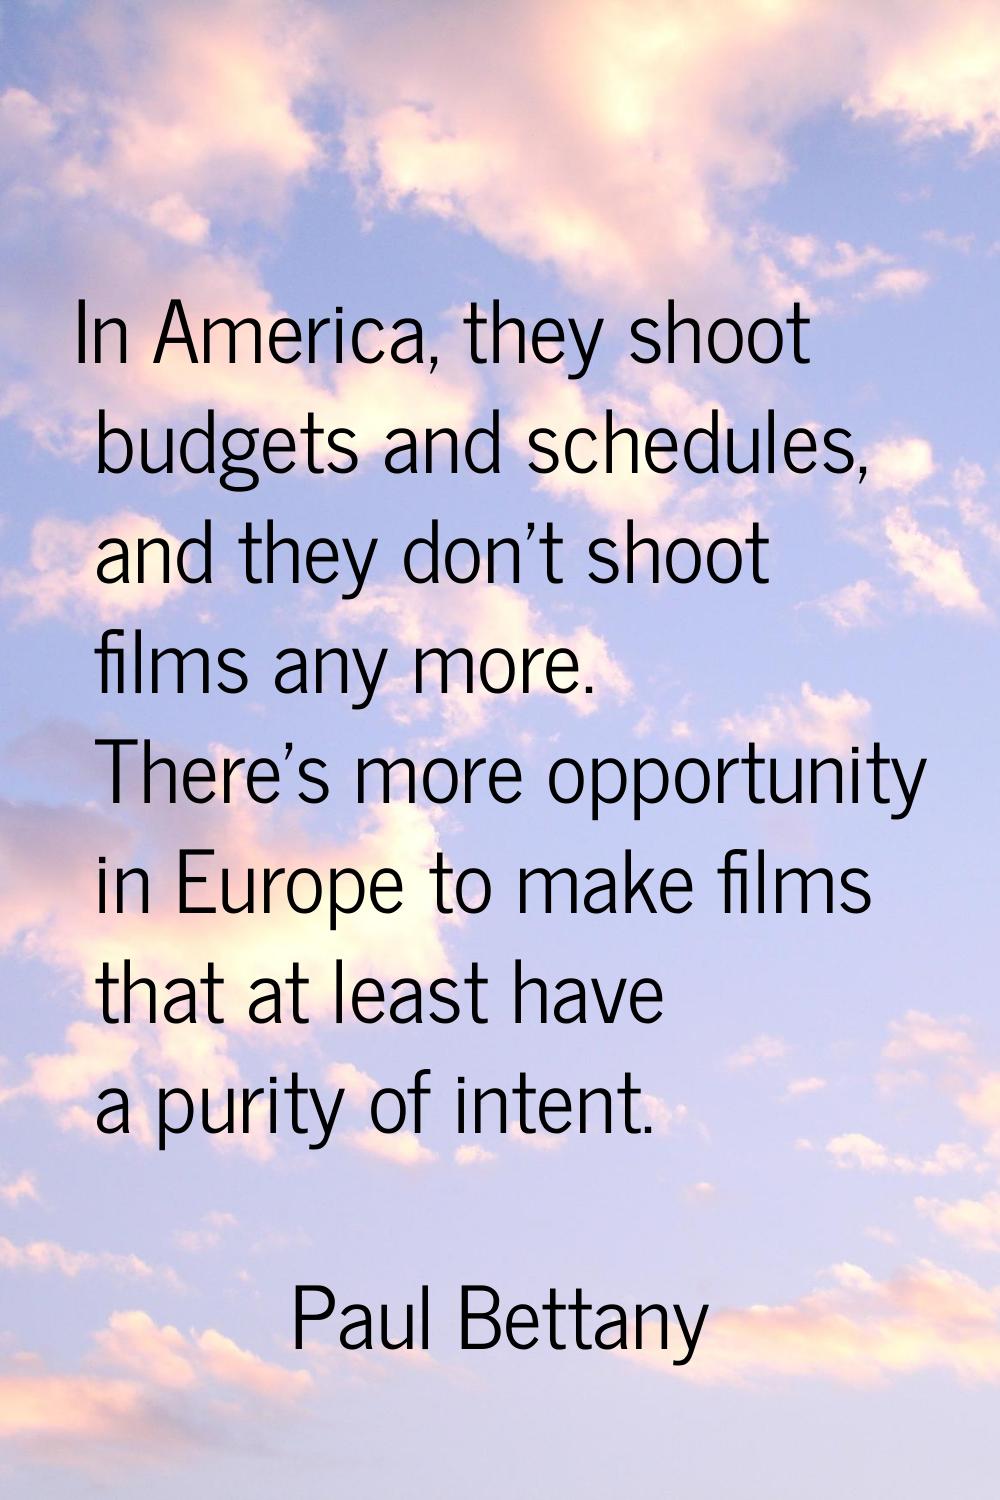 In America, they shoot budgets and schedules, and they don't shoot films any more. There's more opp